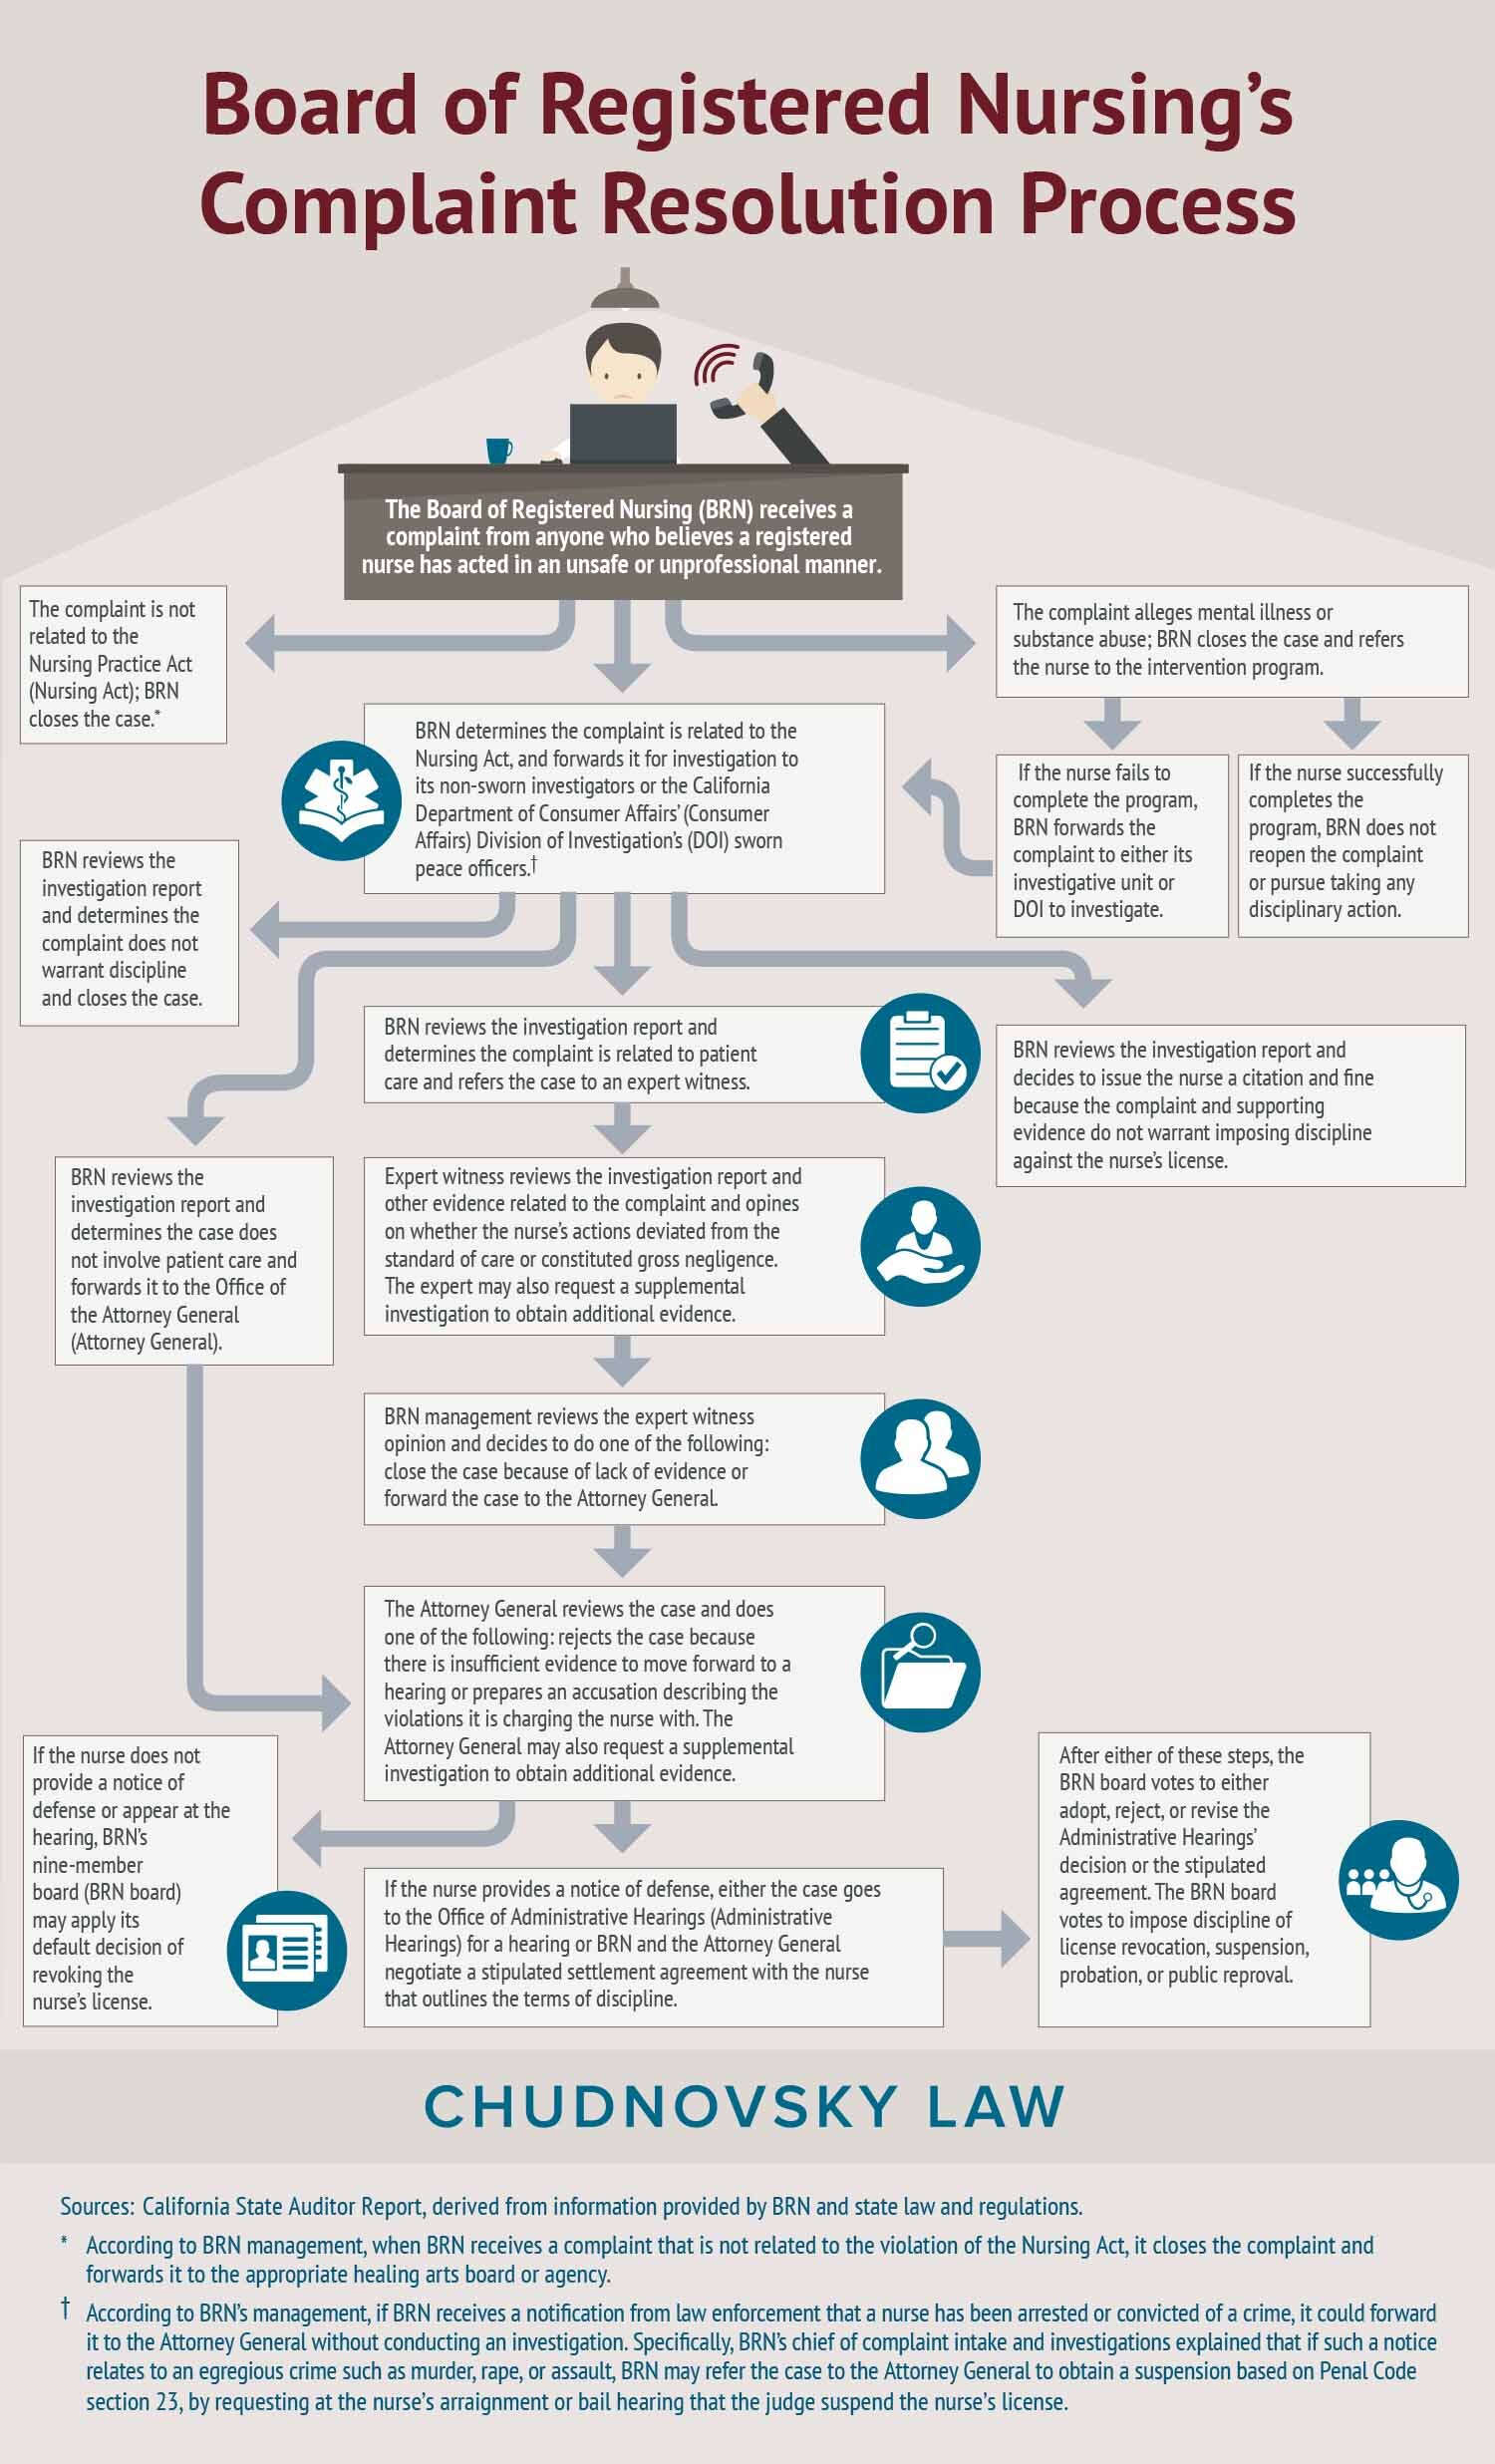 California Board of Nursing infographic explaining the Board of Registered Nursing disciplinary complaint resolution process and procedures. Source: California Board of Registered Nursing and the California State Auditor Report.